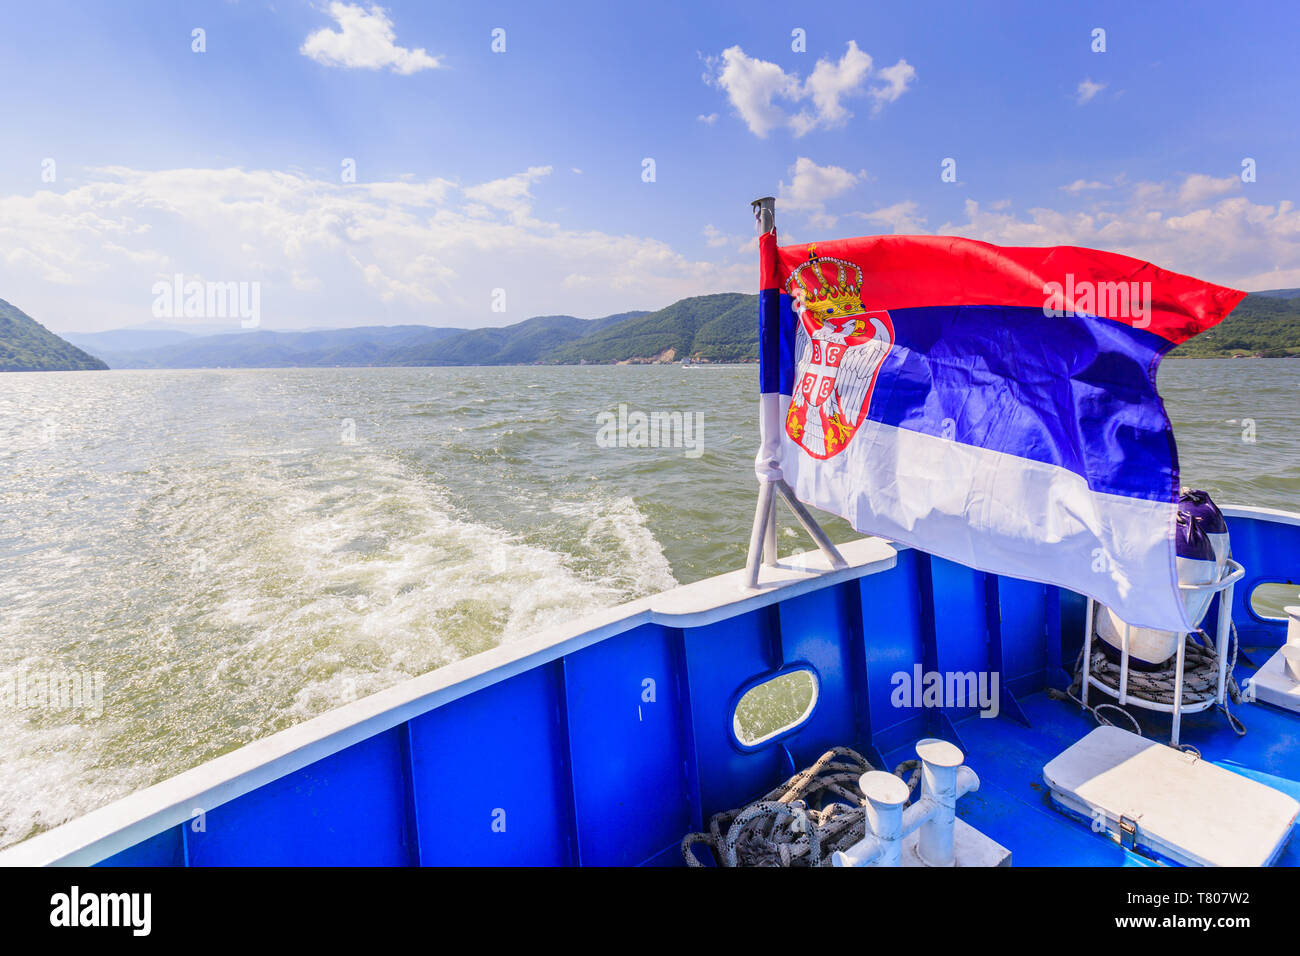 Serbia national flag on tourist boat , Danube river landscape and sky with clouds in background Stock Photo